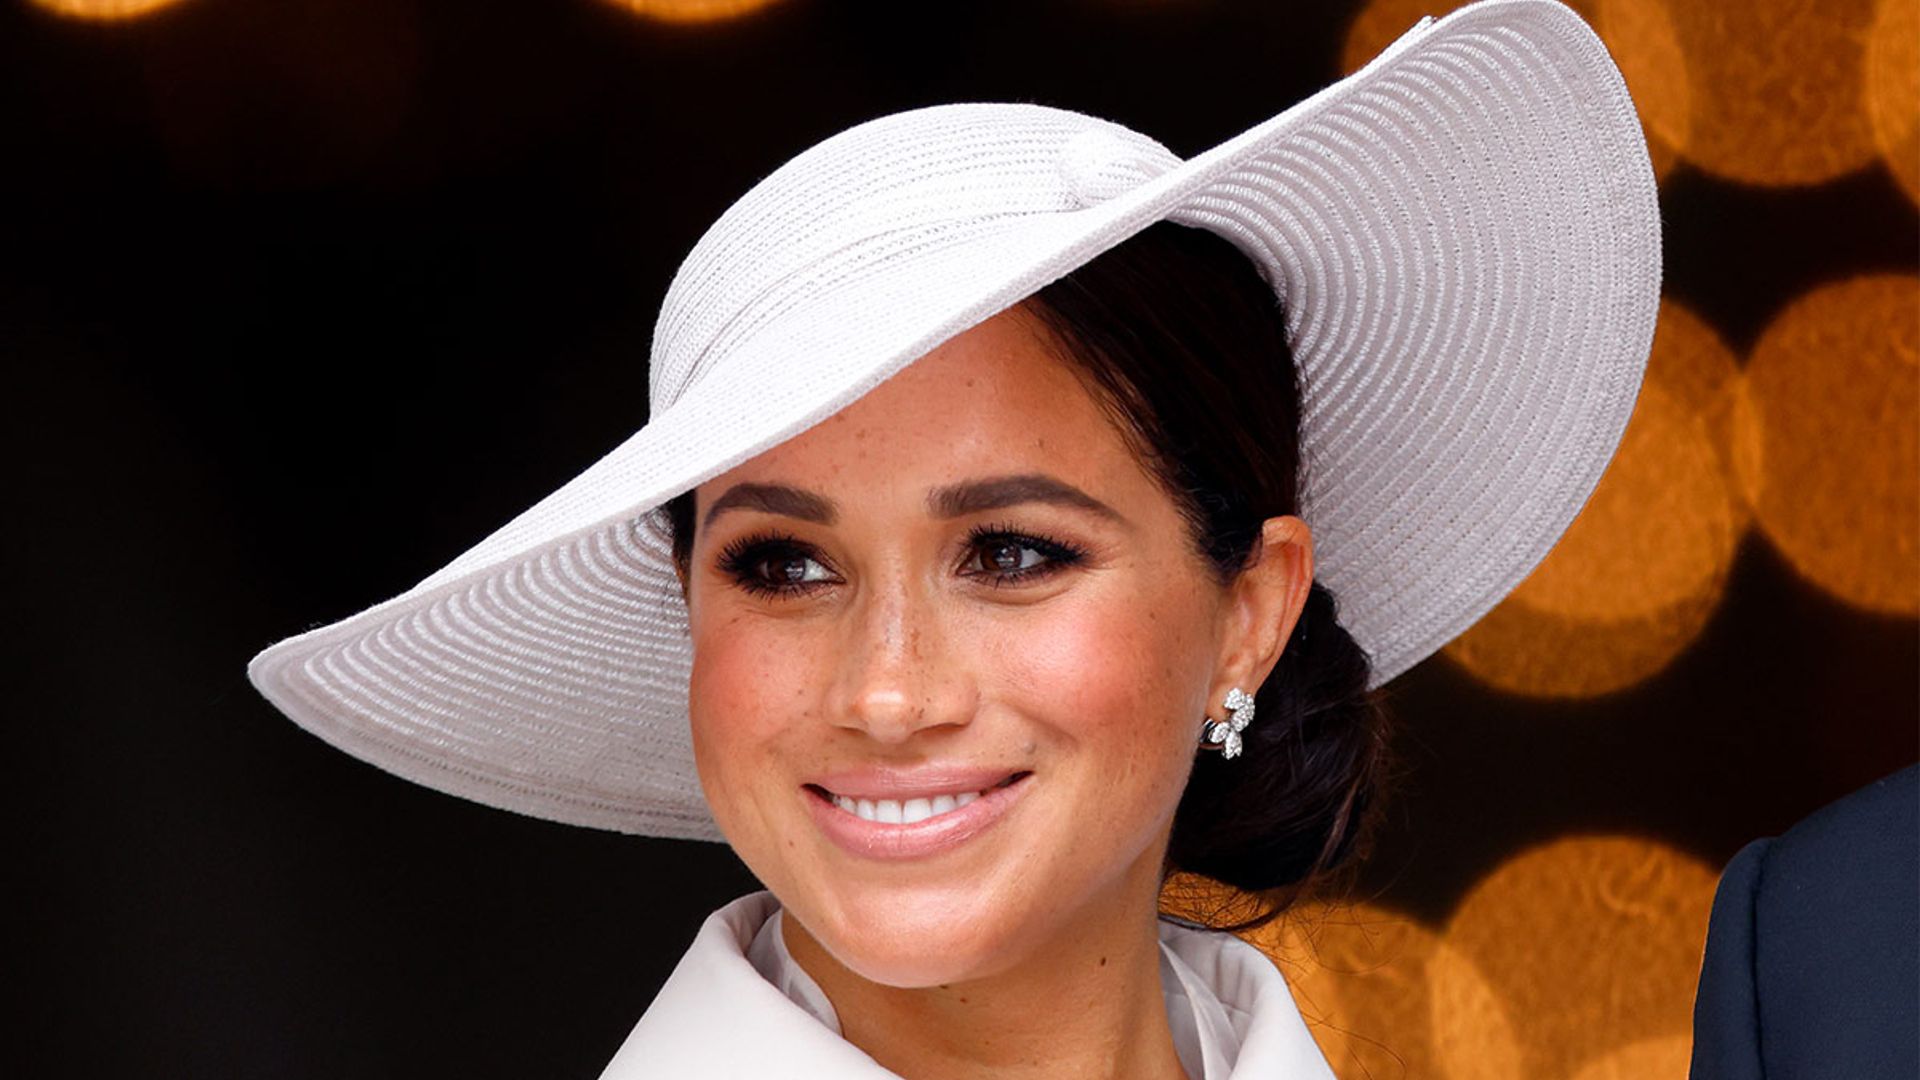 The Duchess of Sussex sends special treats to very important organisation